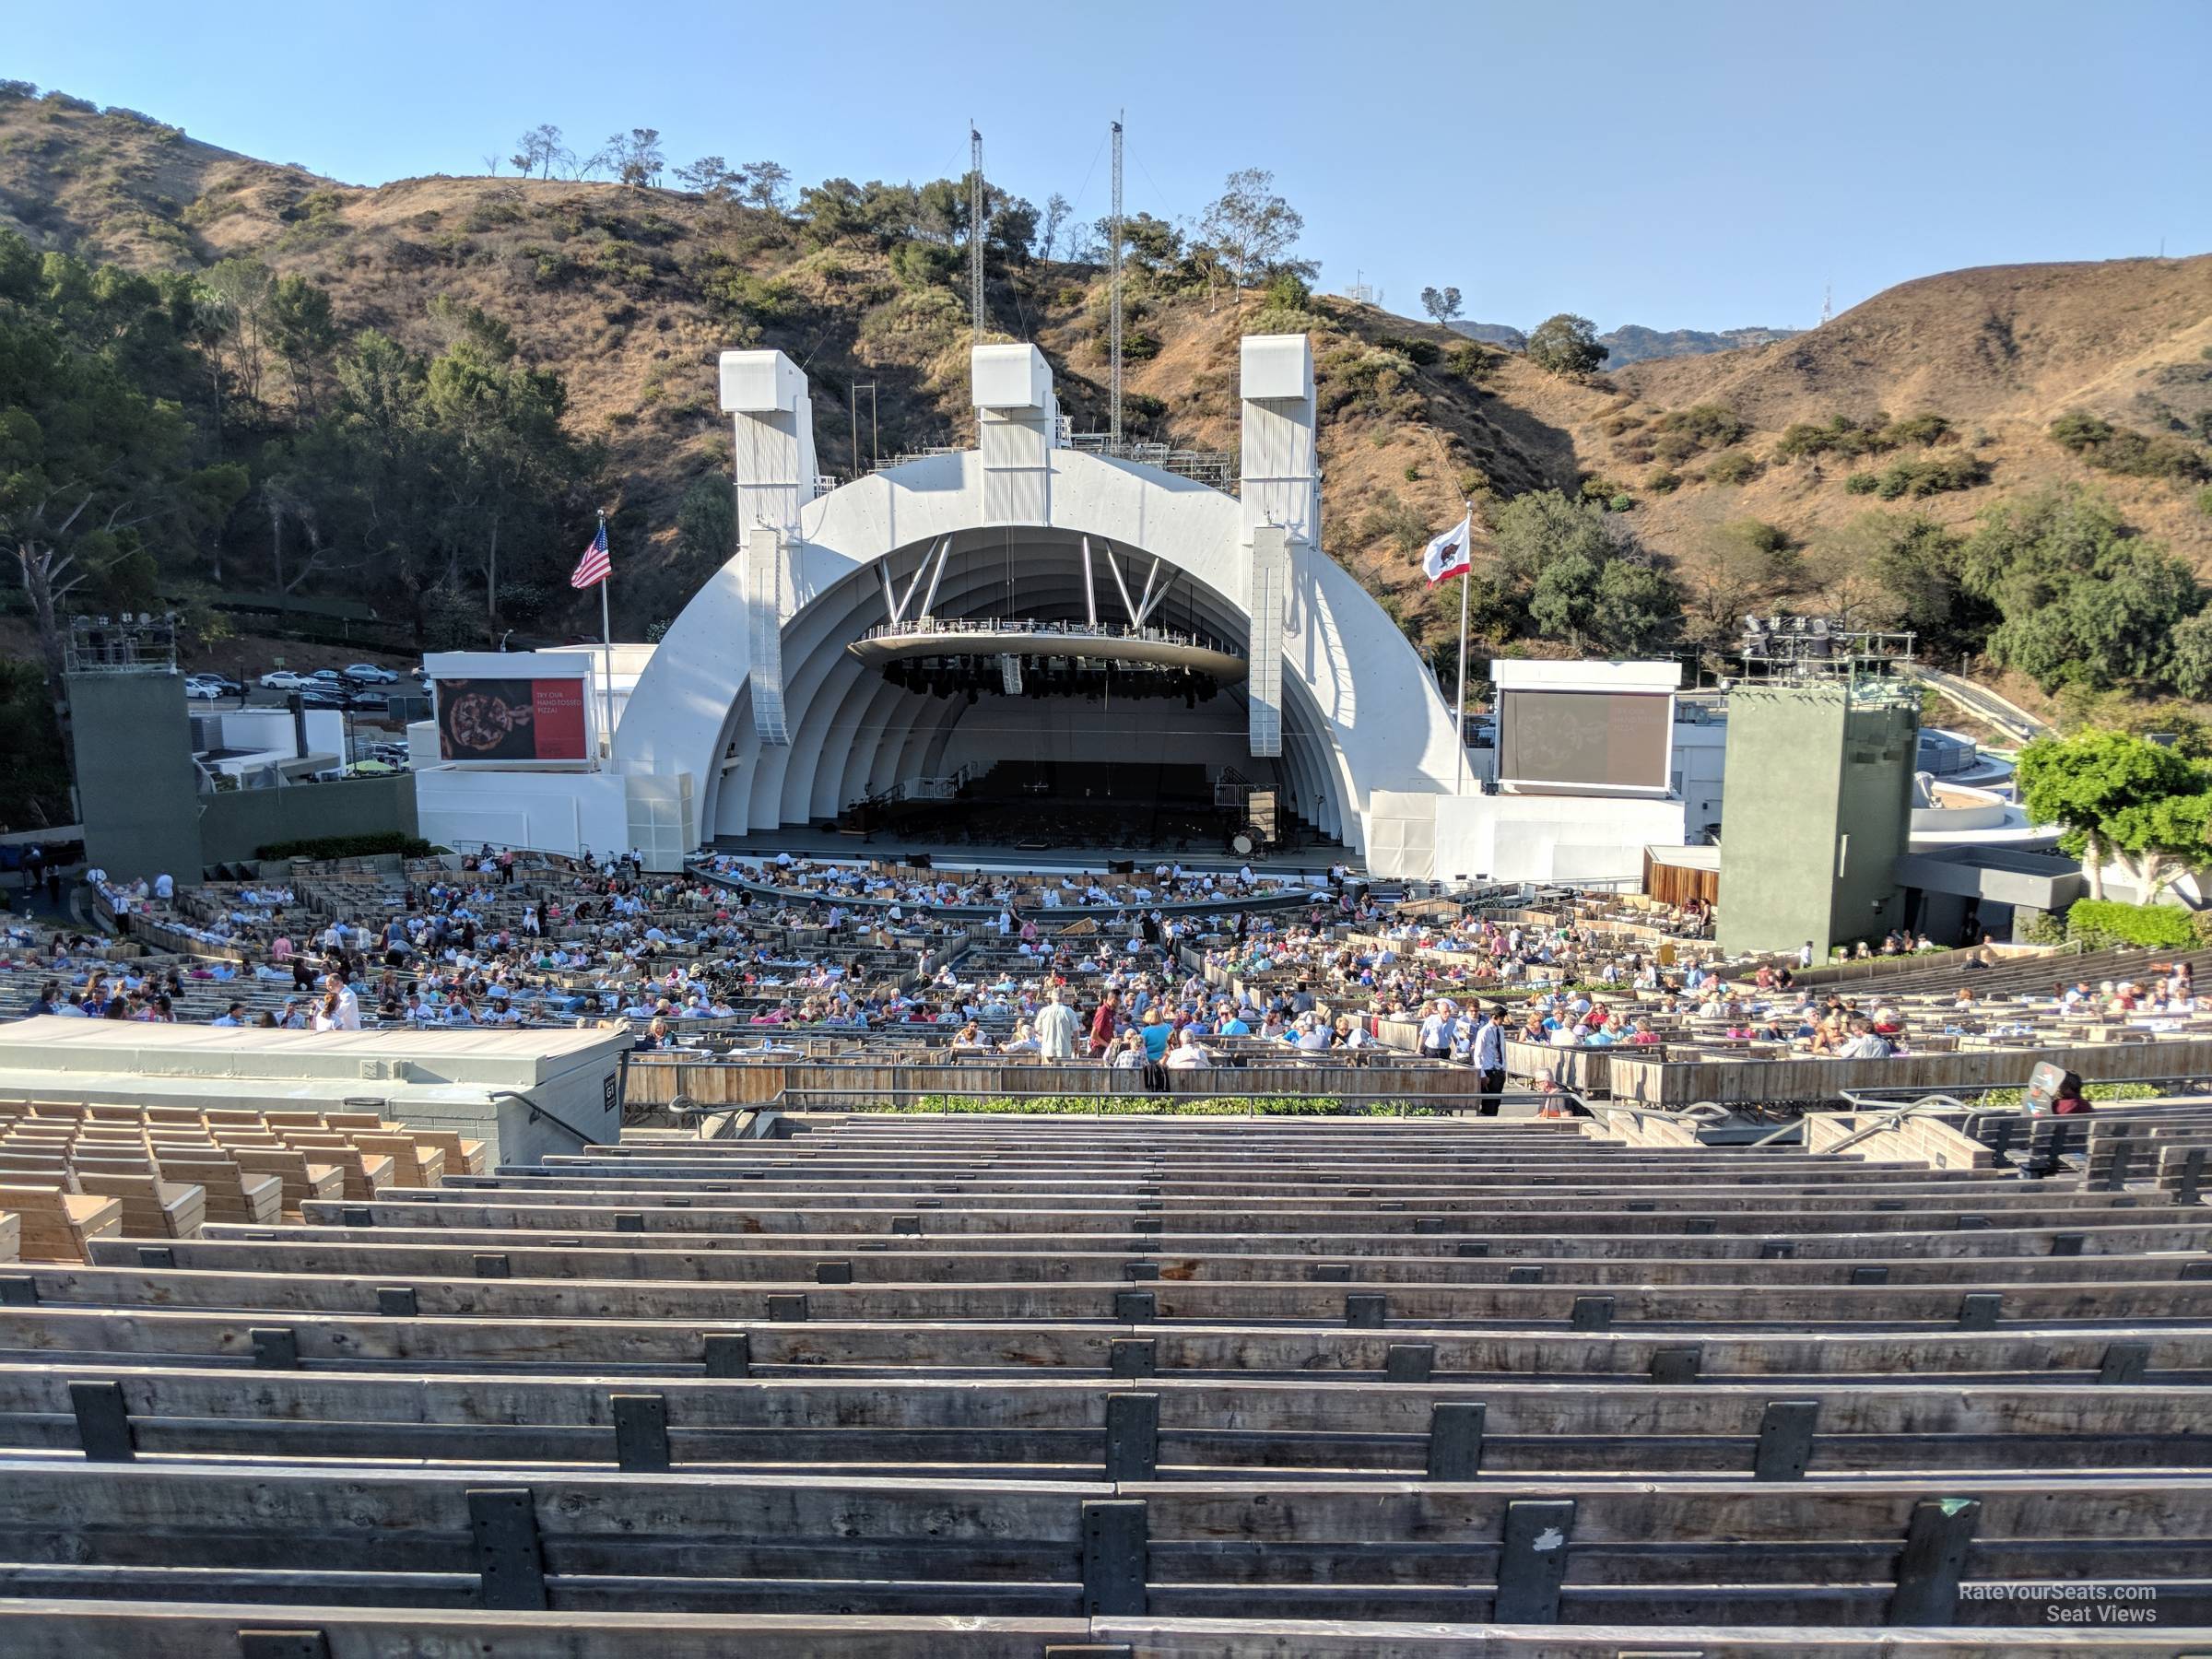 head-on concert view at Hollywood Bowl